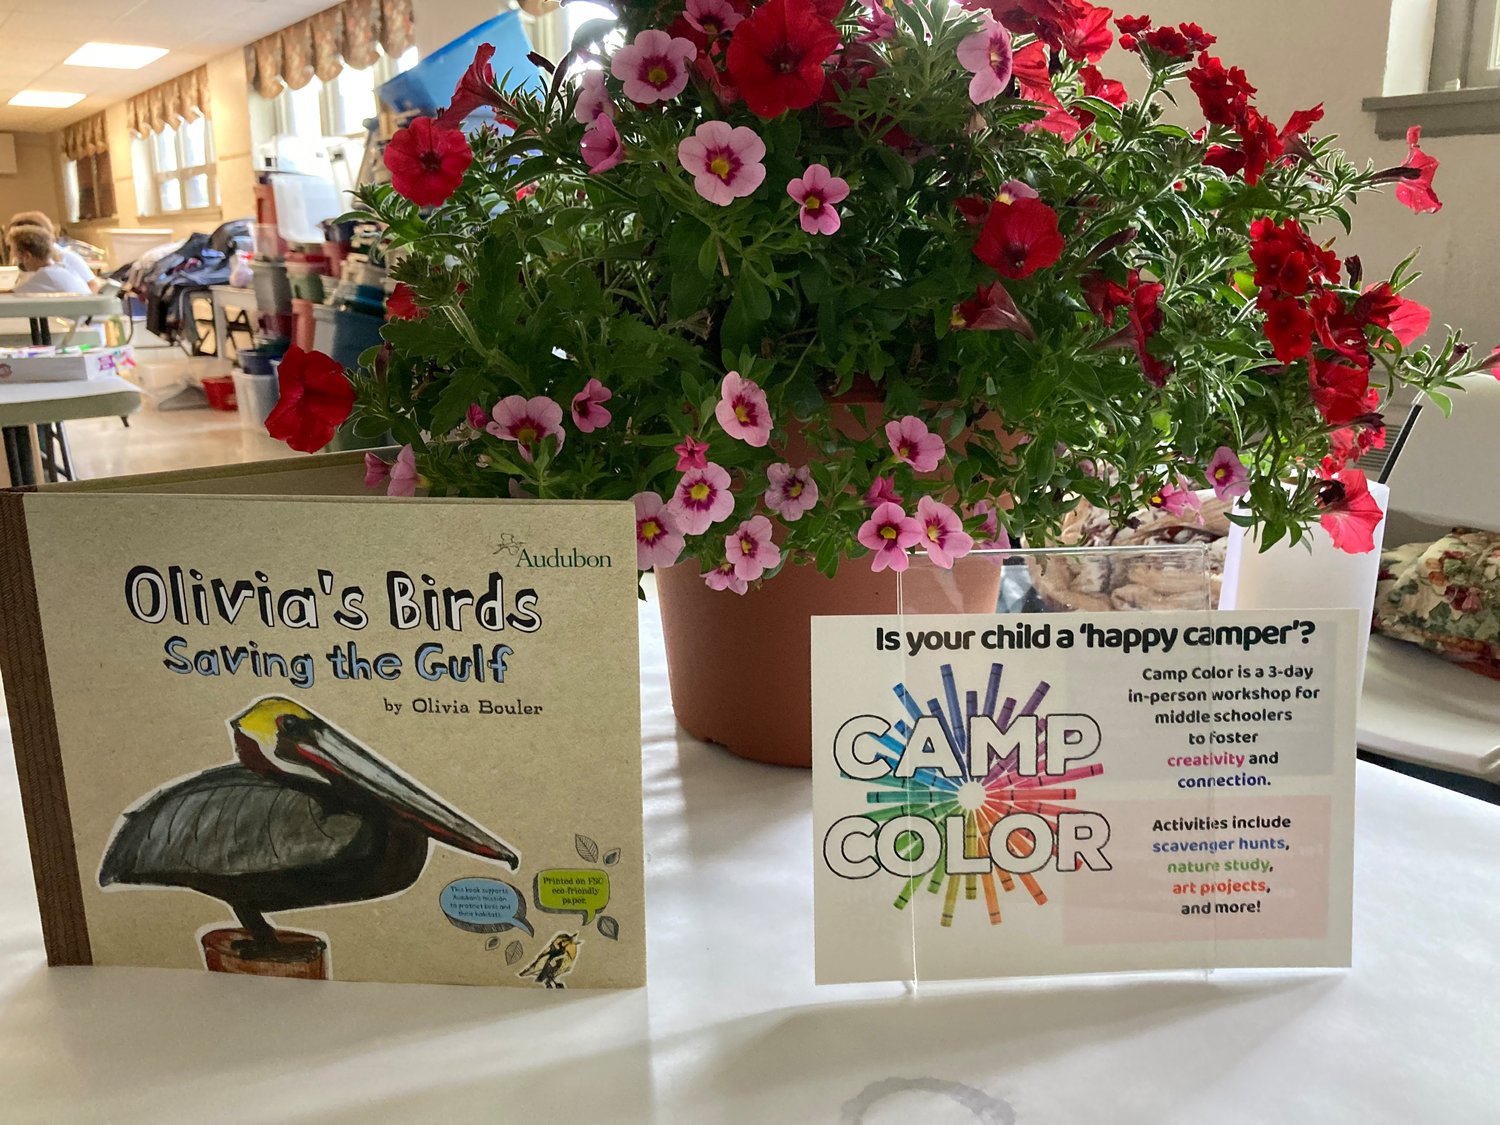 An arrangement from Camp Color featuring Ollie Bouler’s book “Olivia’s Birds,” of which each student received a free copy.